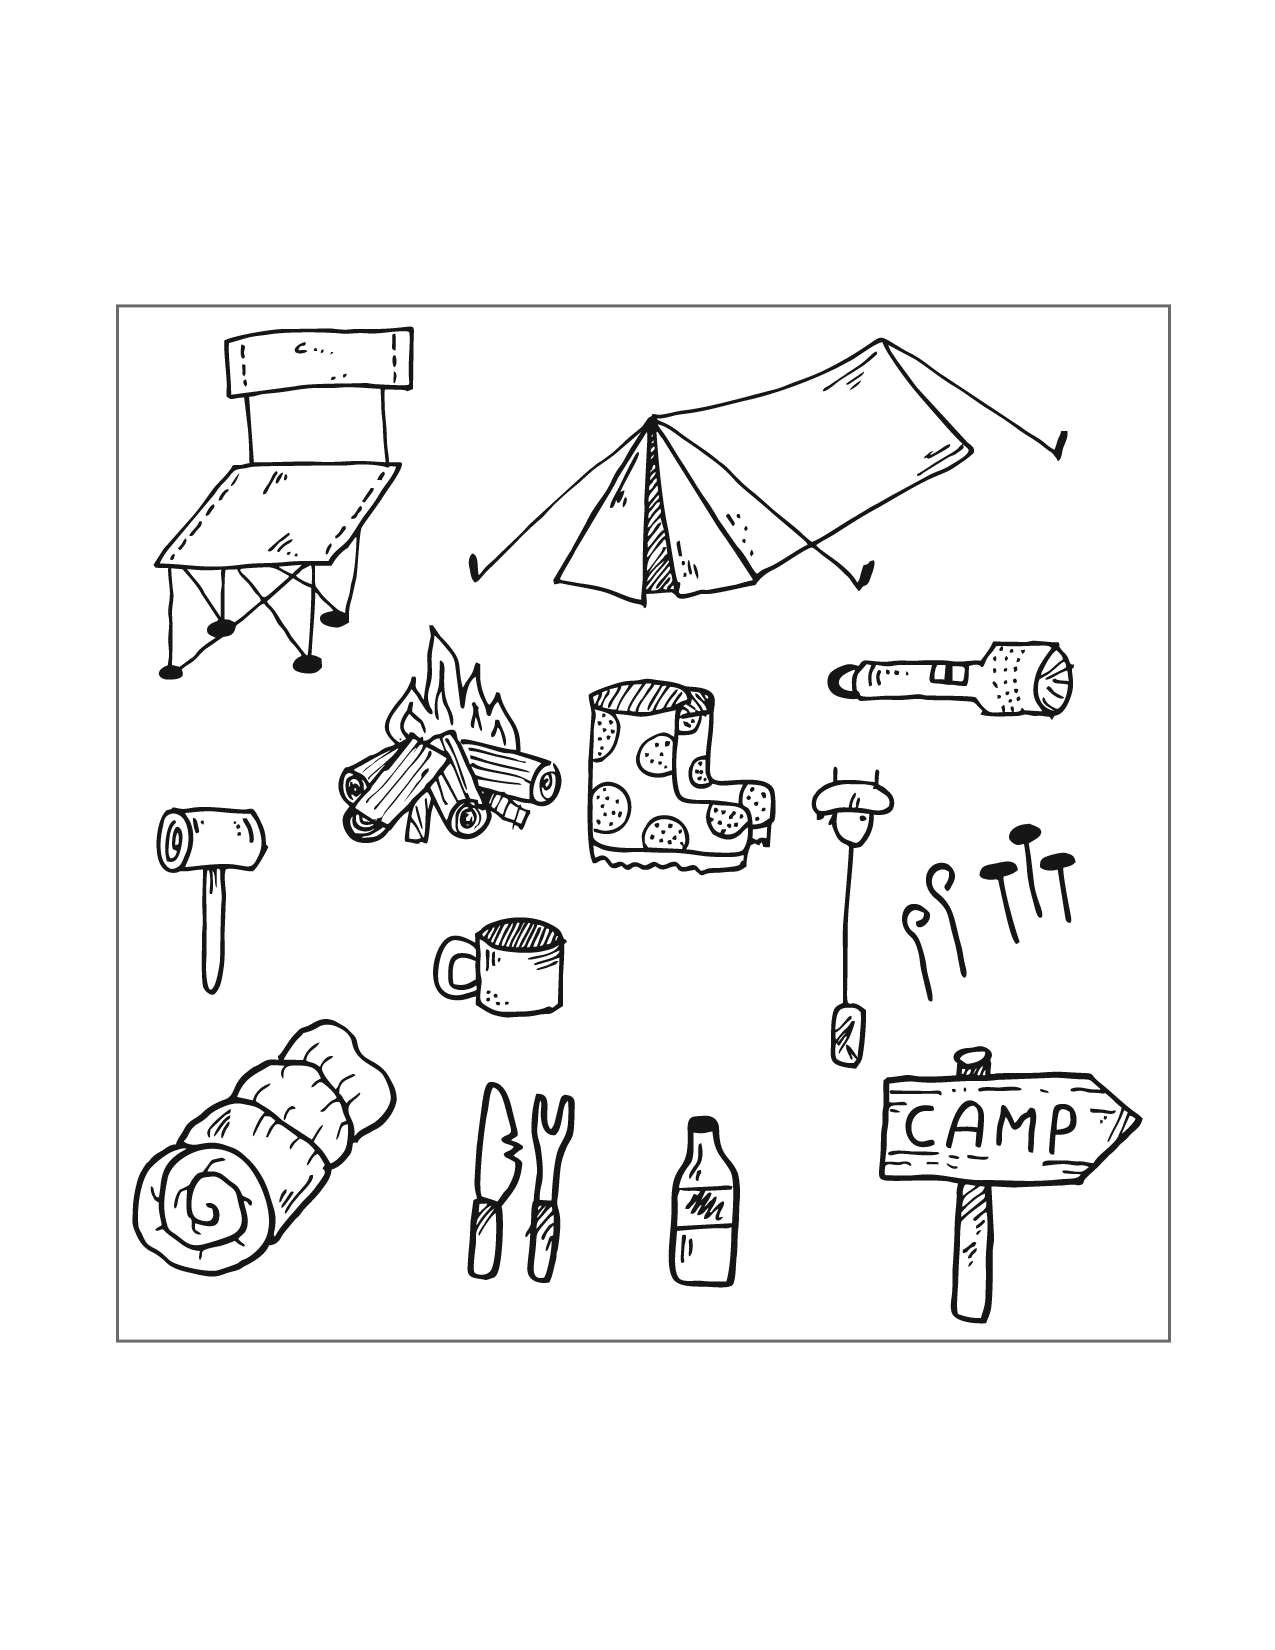 Fun Camping Icons 2 Coloring Page